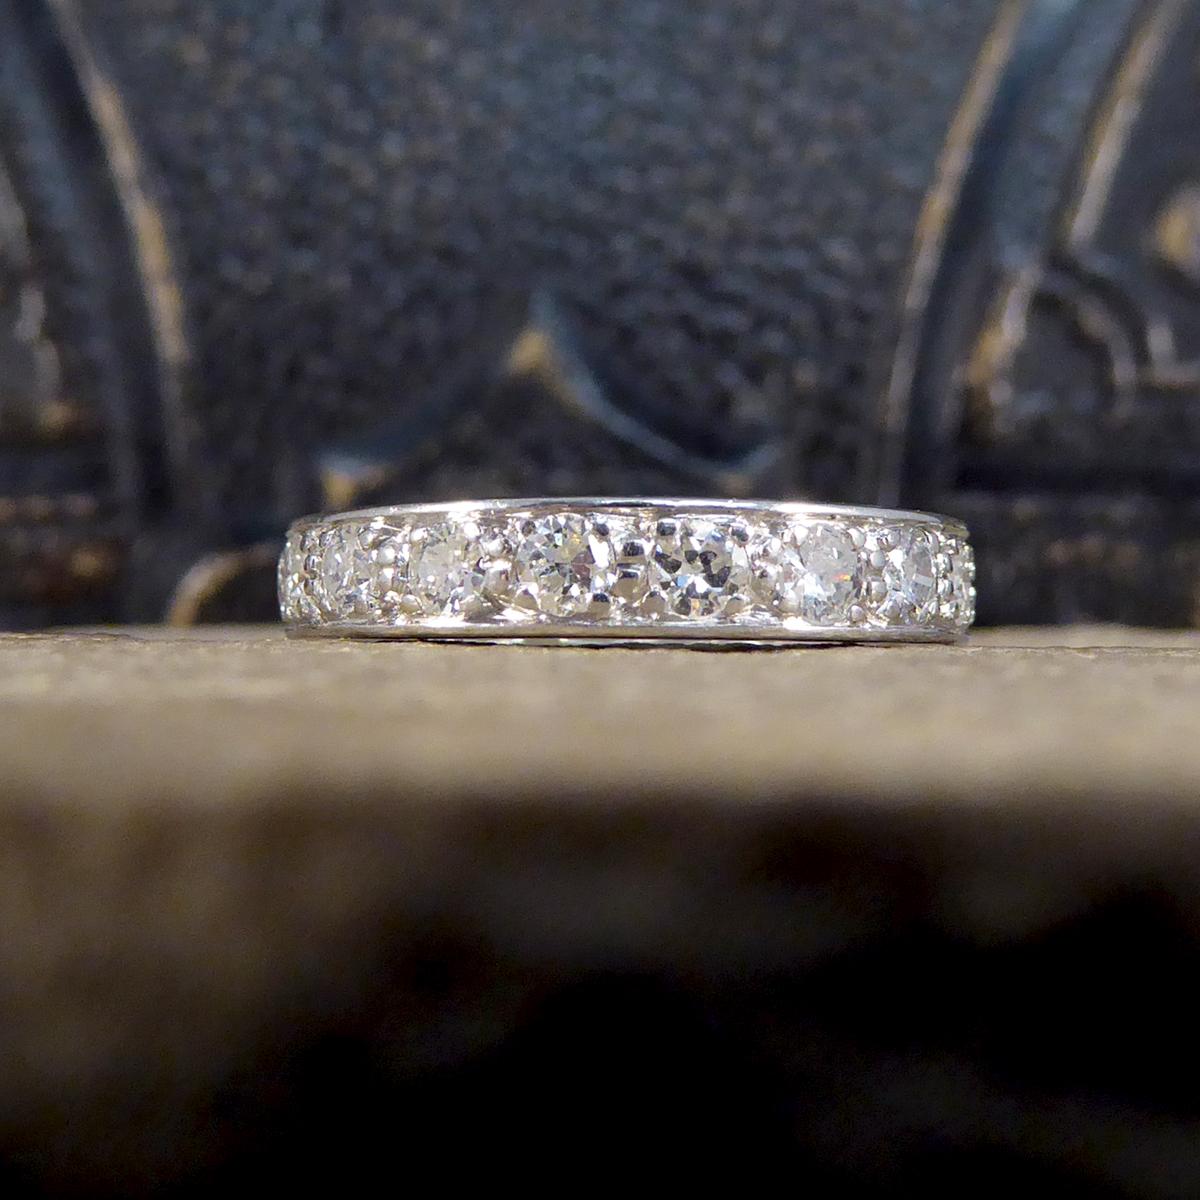 Such a lovely and classic 1920's full eternity ring. This ring has been hand crafted in 18ct White Gold and set with 18 Brilliant Cut Diamonds weighing a total of 1.44ct and sparkling all across the head of the finger. Shows signs on the side of the